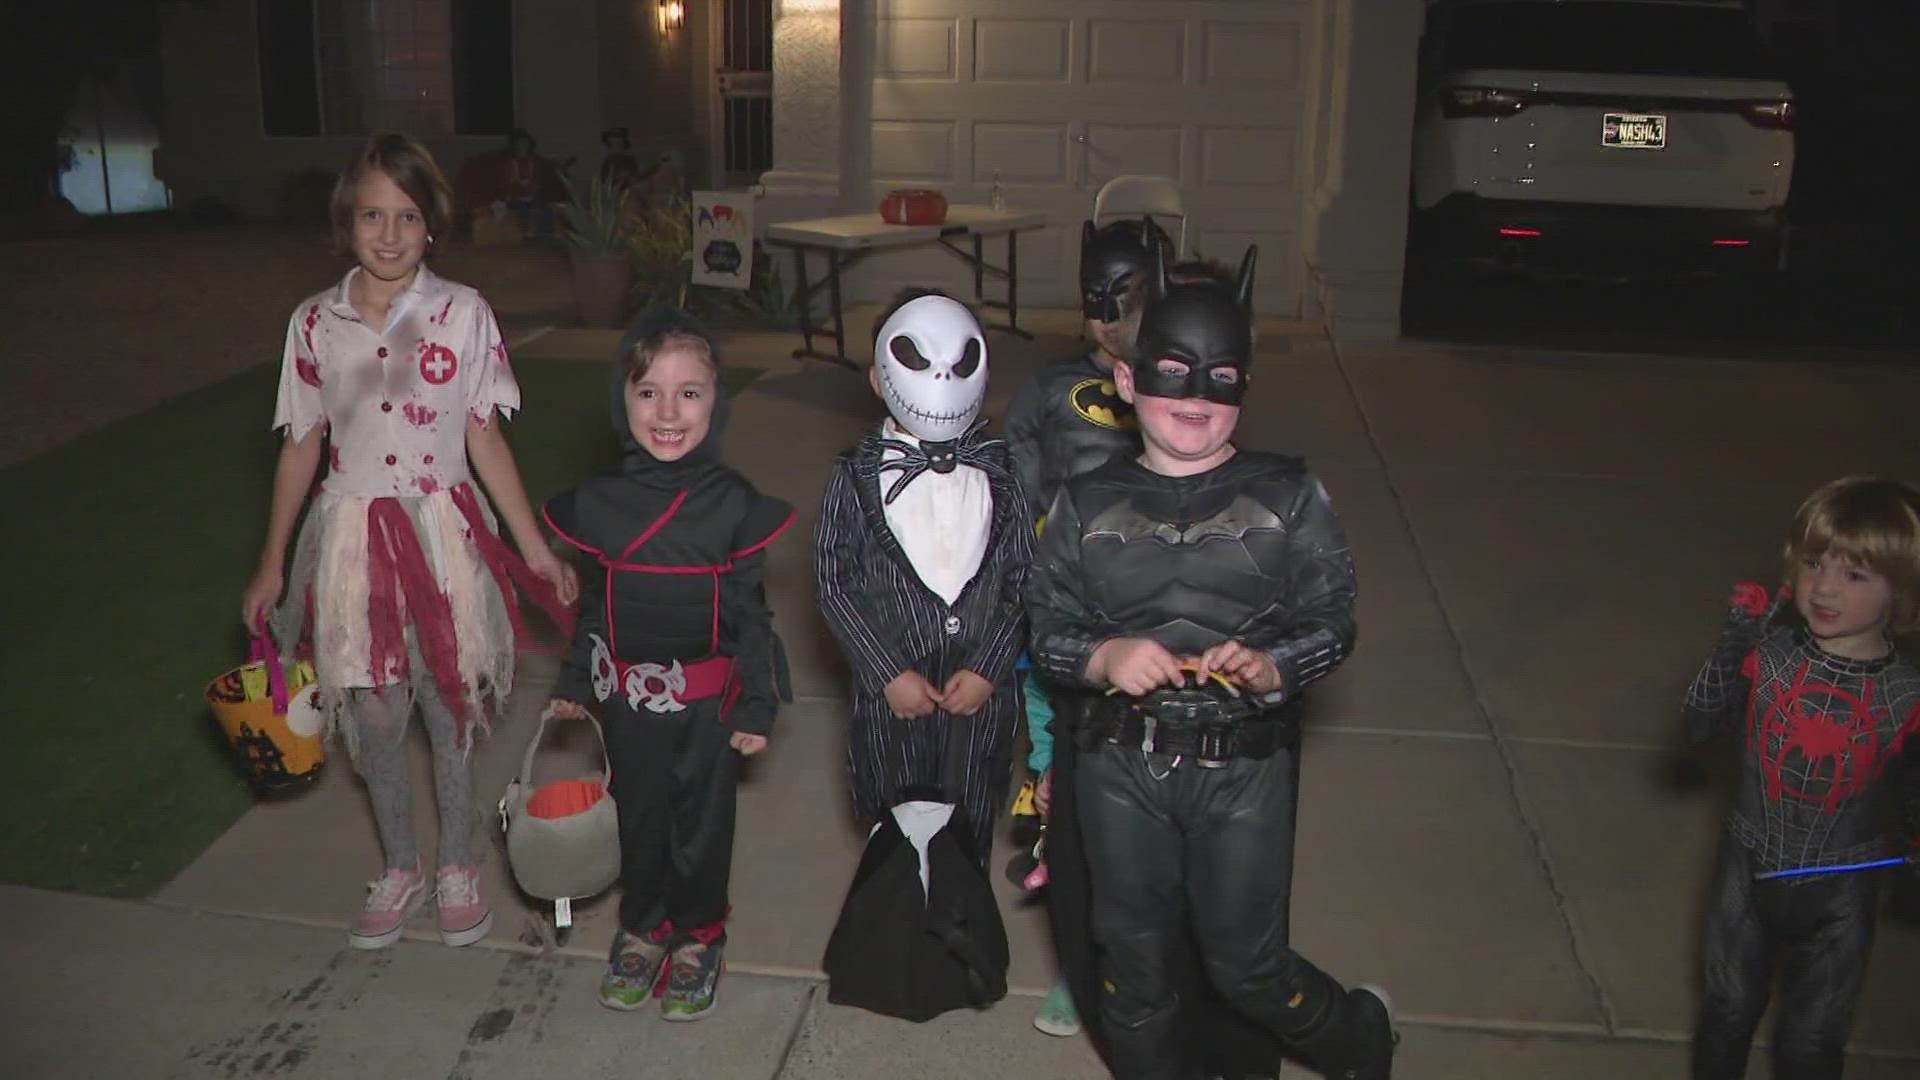 12News catches up with Valley trick-or-treaters out for some holiday fun.